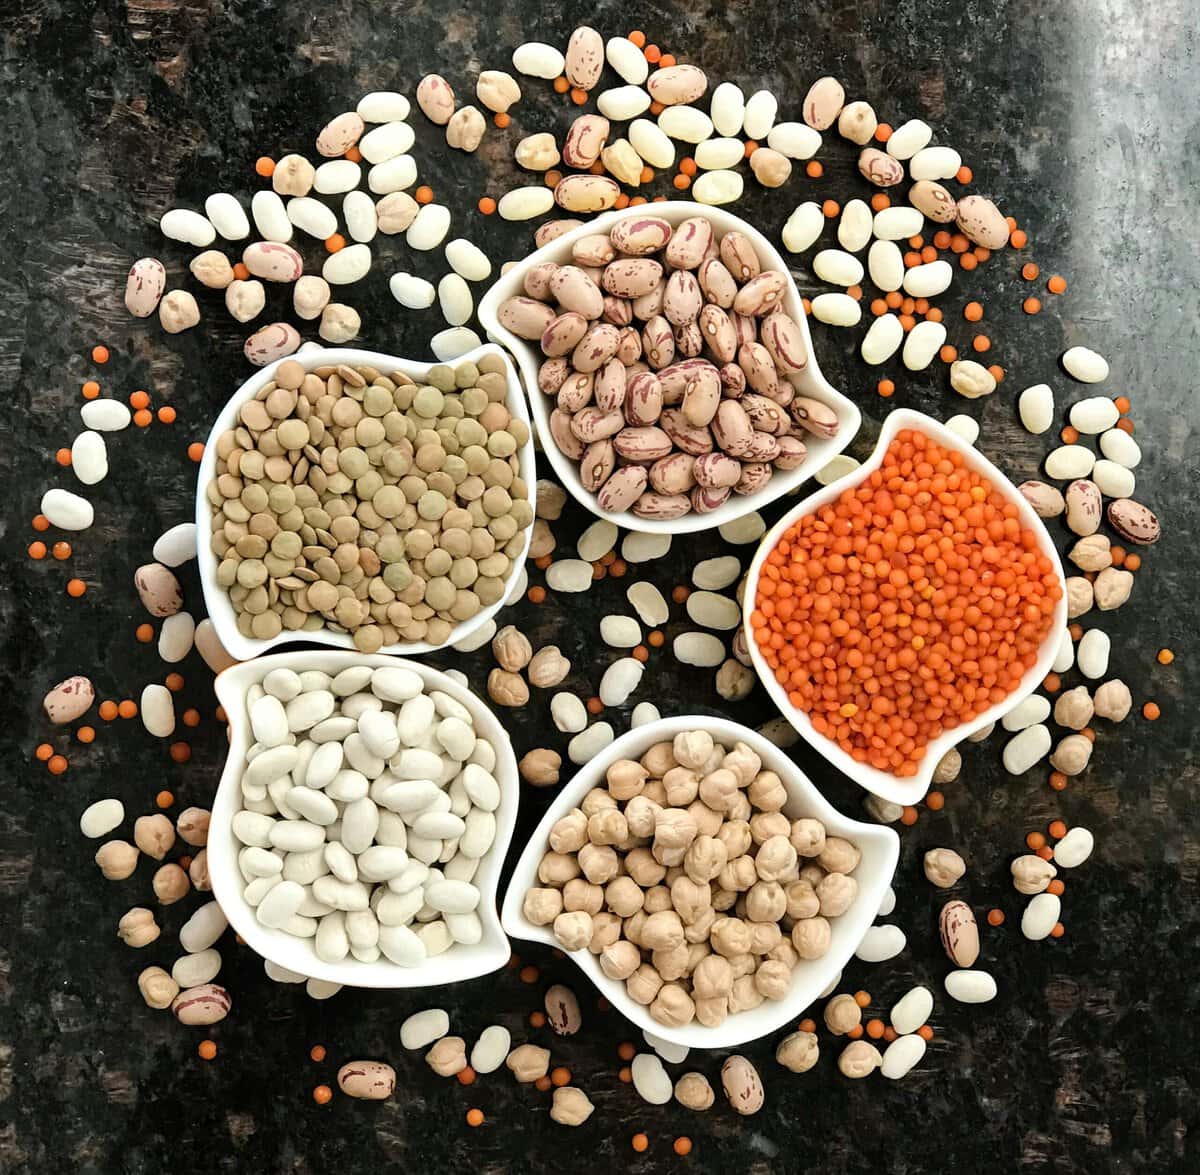 High protein legumes in white bowls.